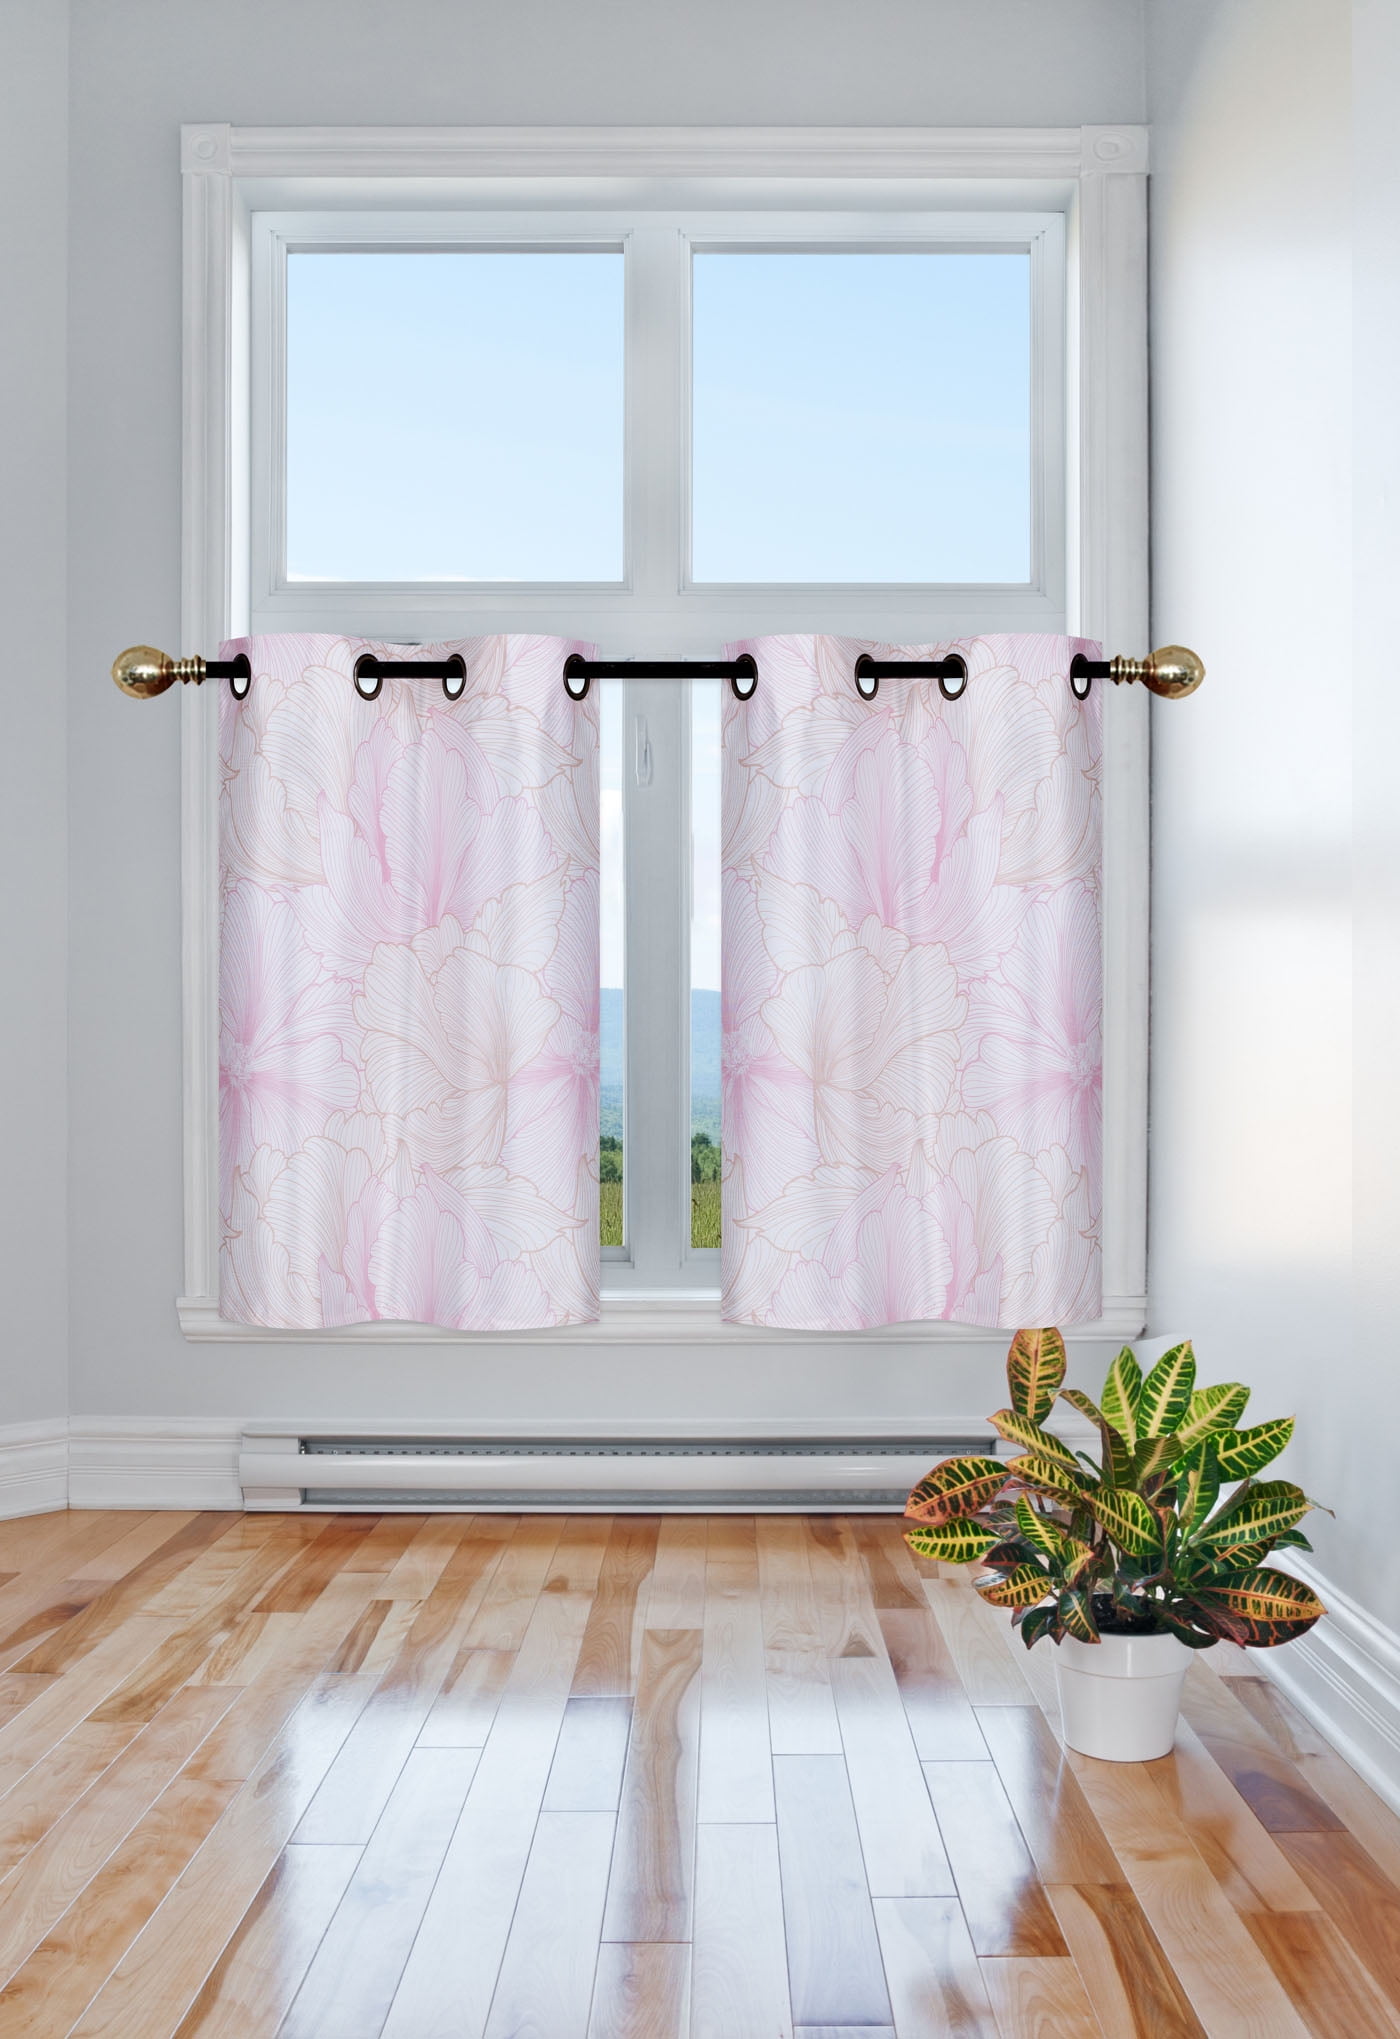 SOPHISTICATED 1 SINGLE PANEL FLORAL PRINTED WINDOW CUTAIN BLACKOUT STYLE #2 